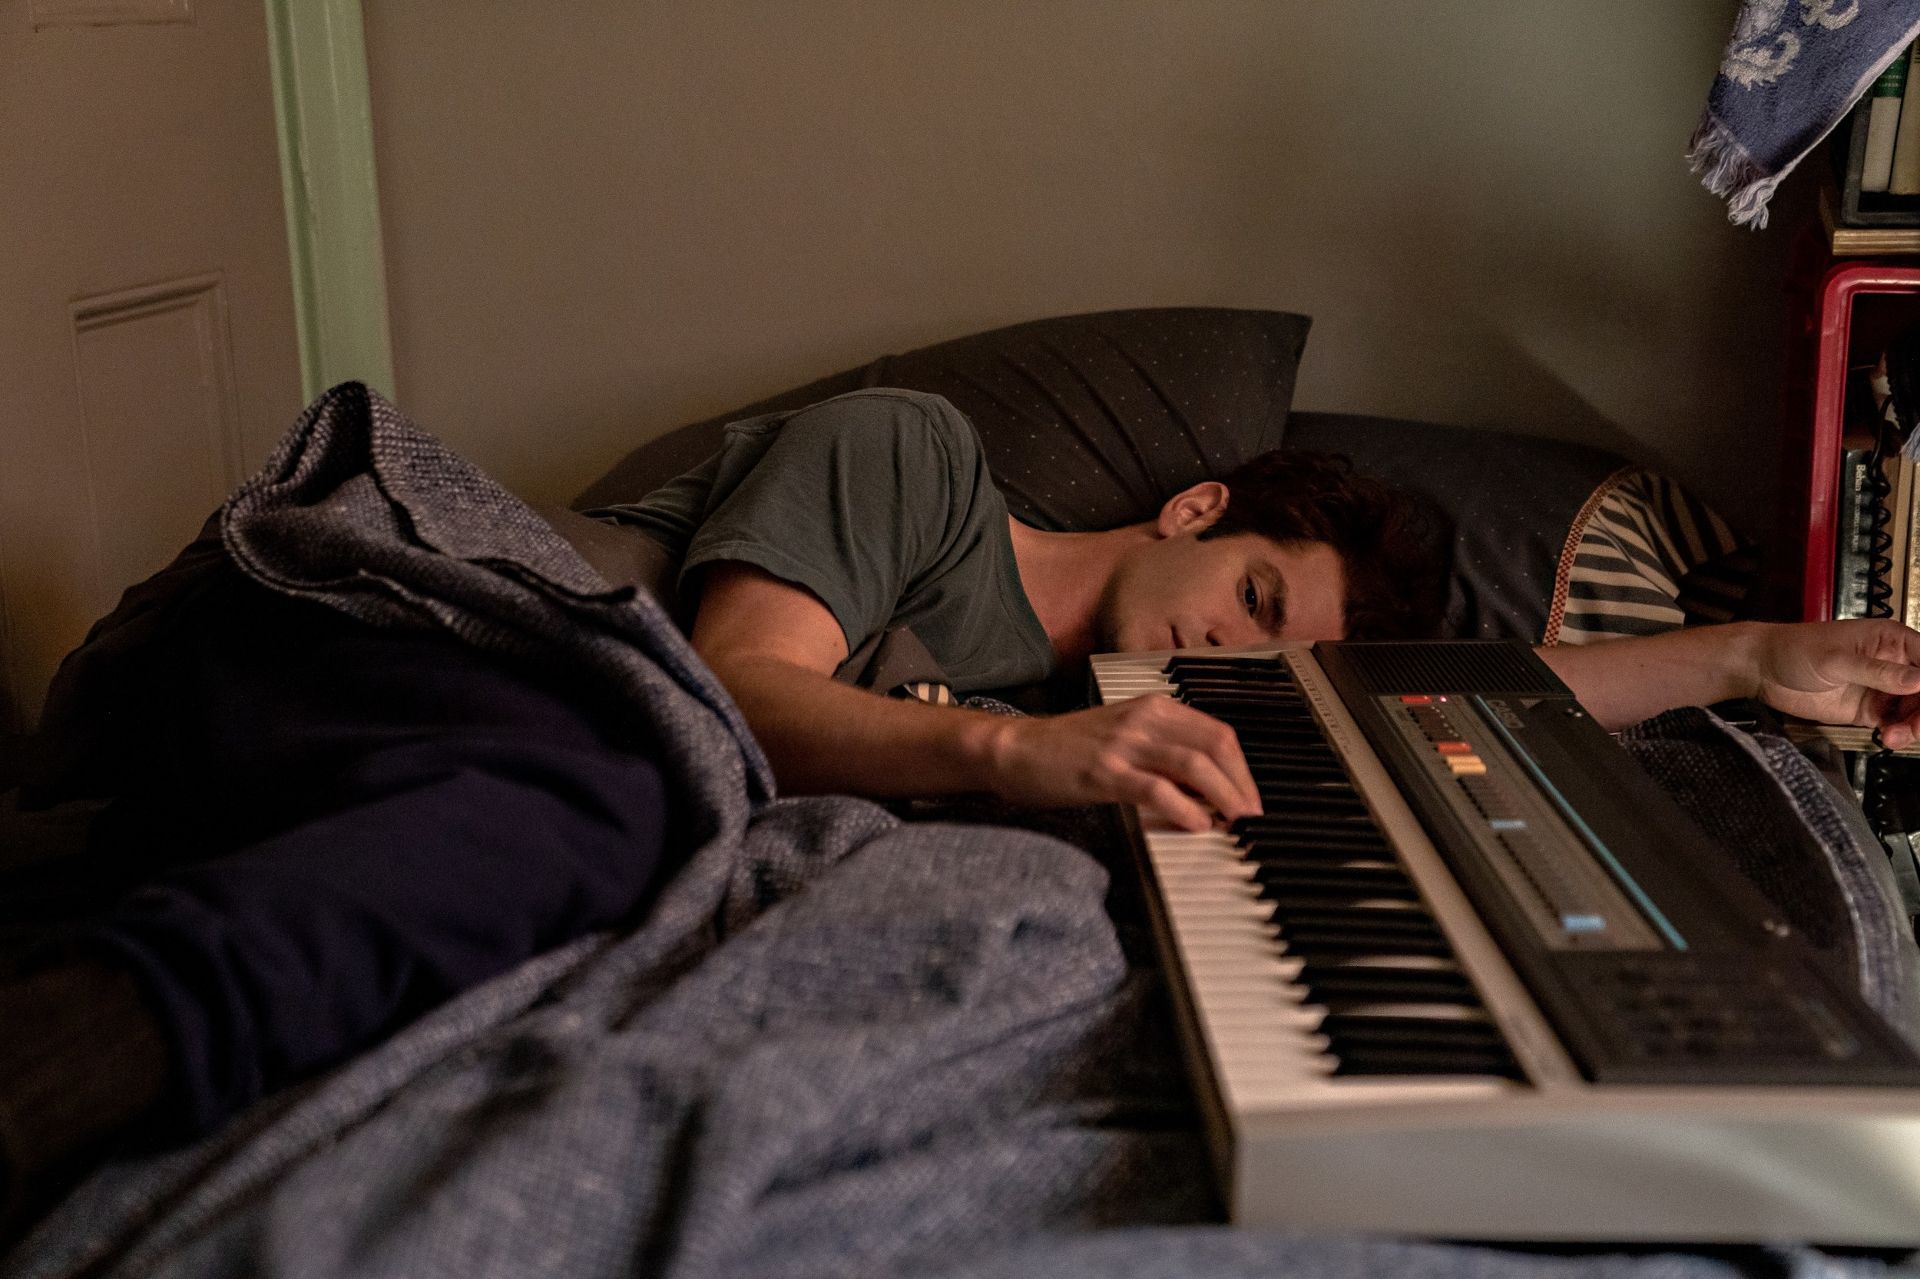 A young man is asleep on a bed with his arm on a keyboard. - Andrew Garfield